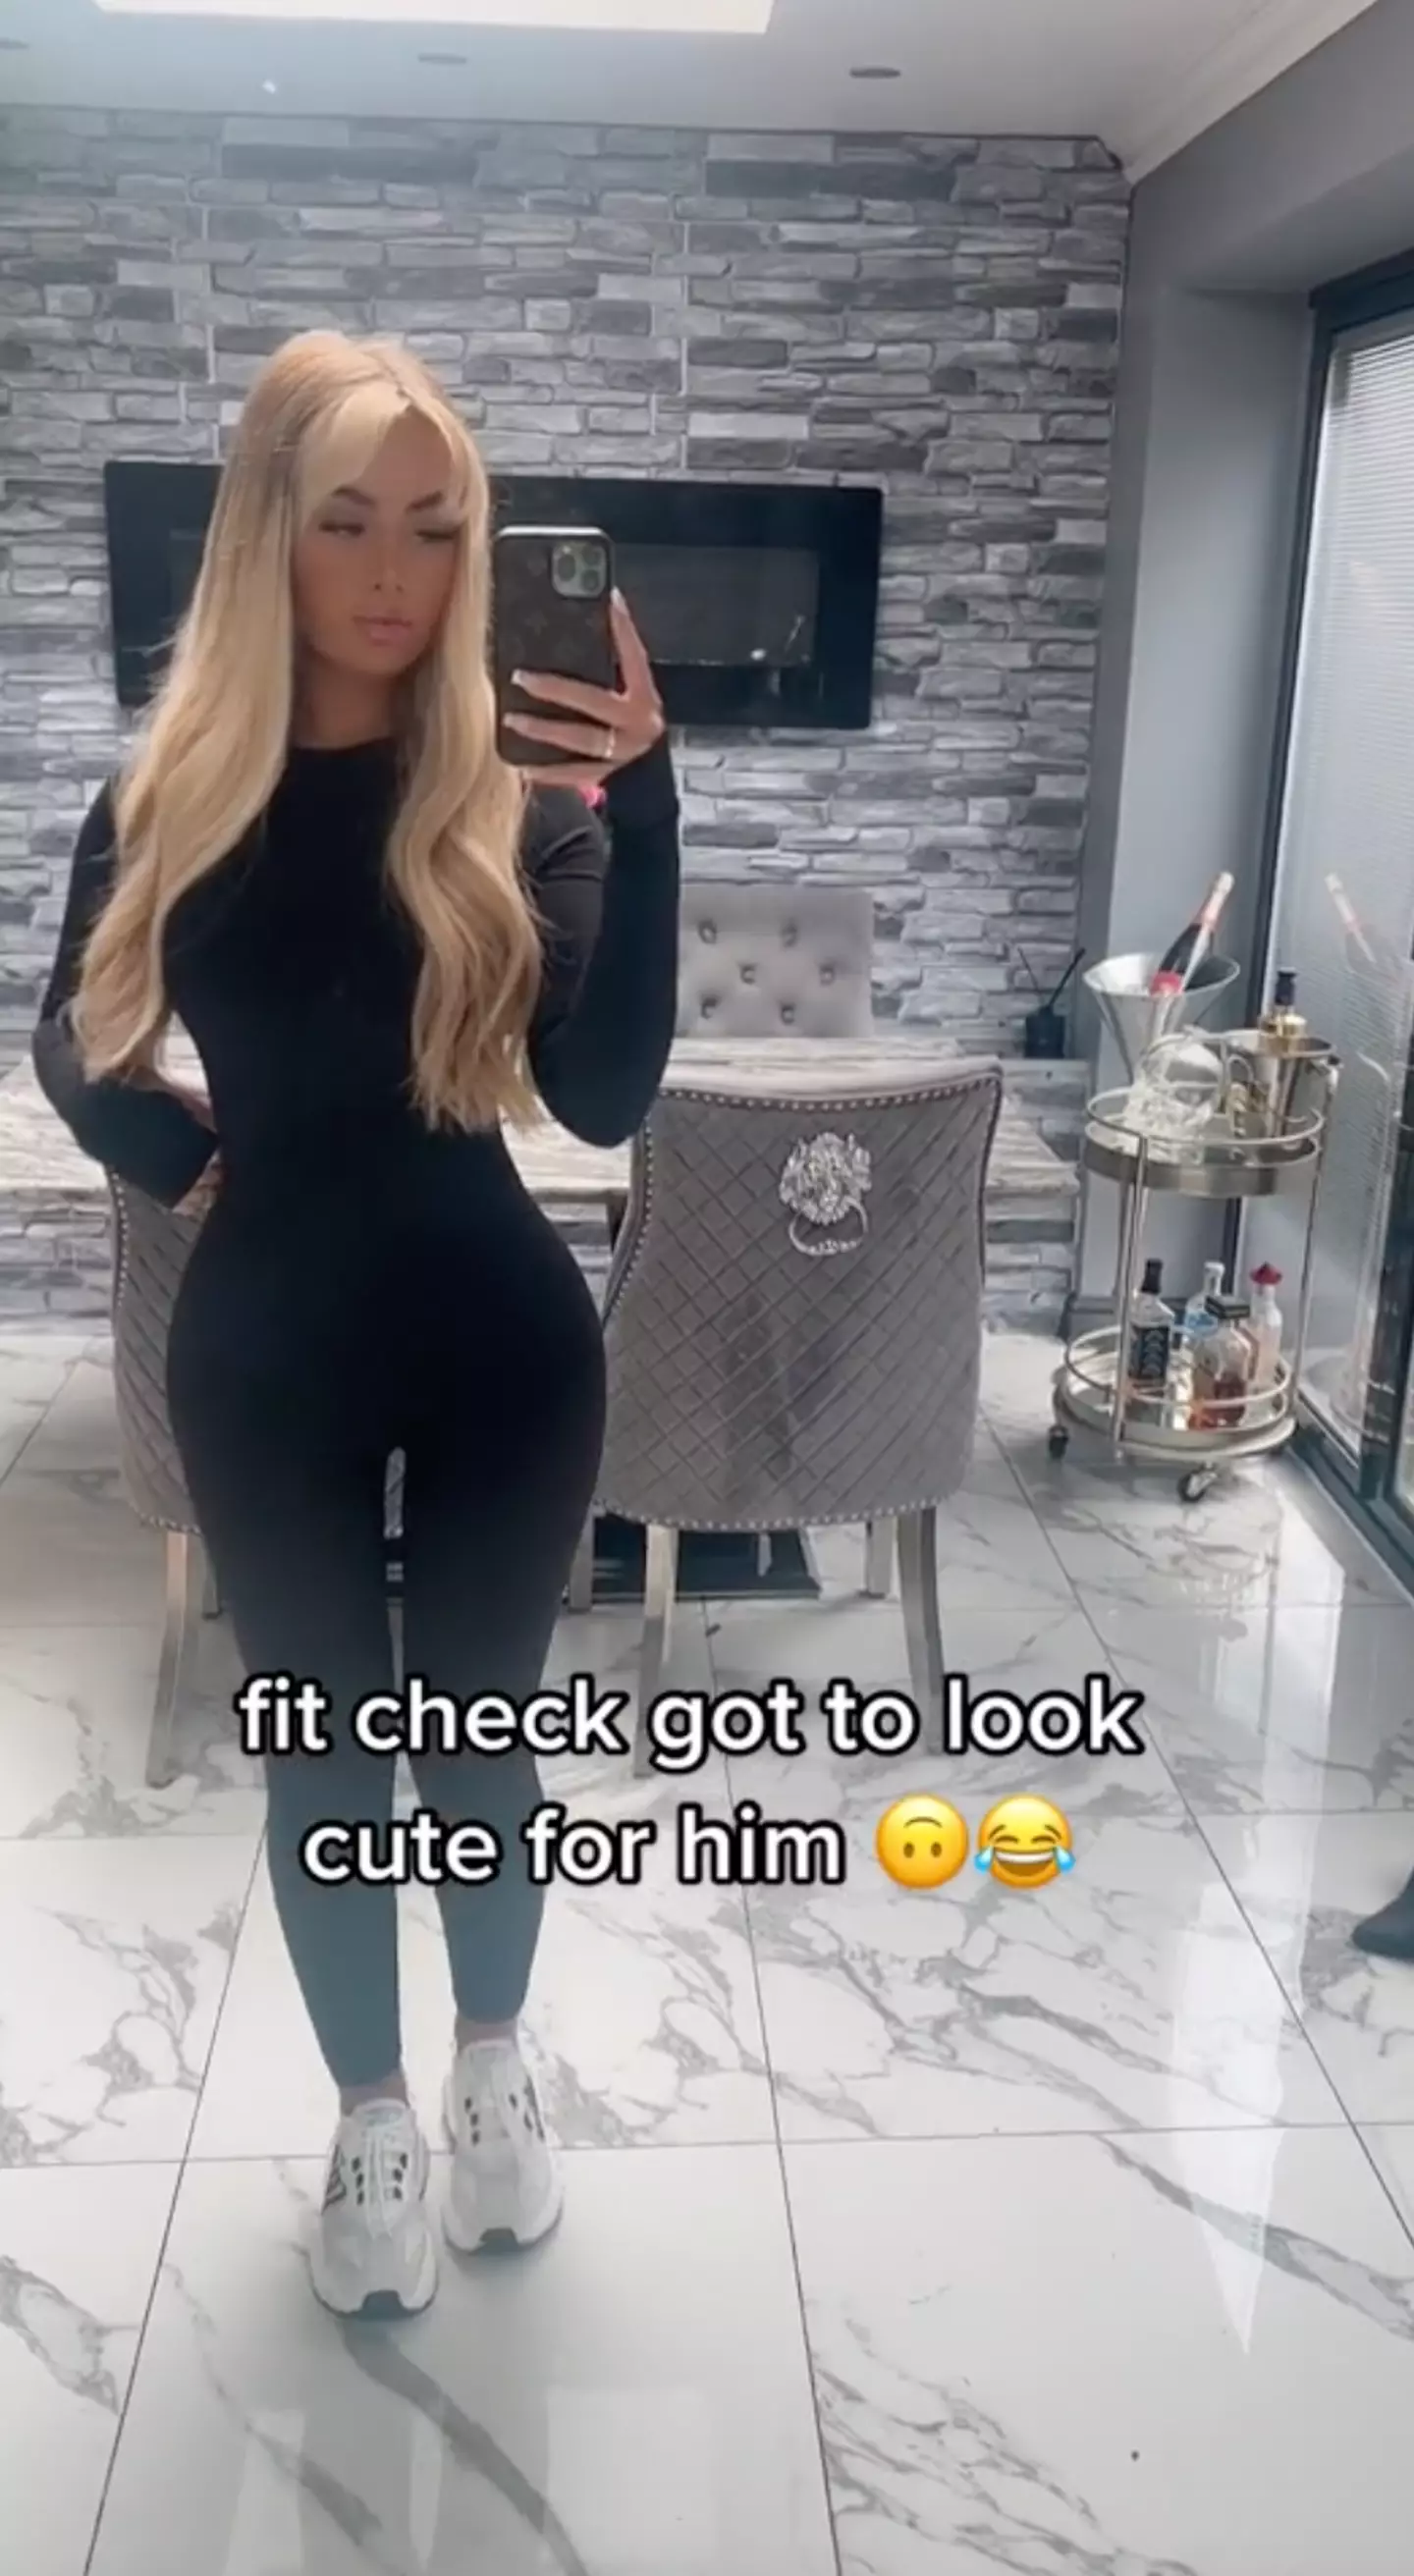 Jessica Smith showed off her outfit on TikTok before visiting Stephen Bear in prison.